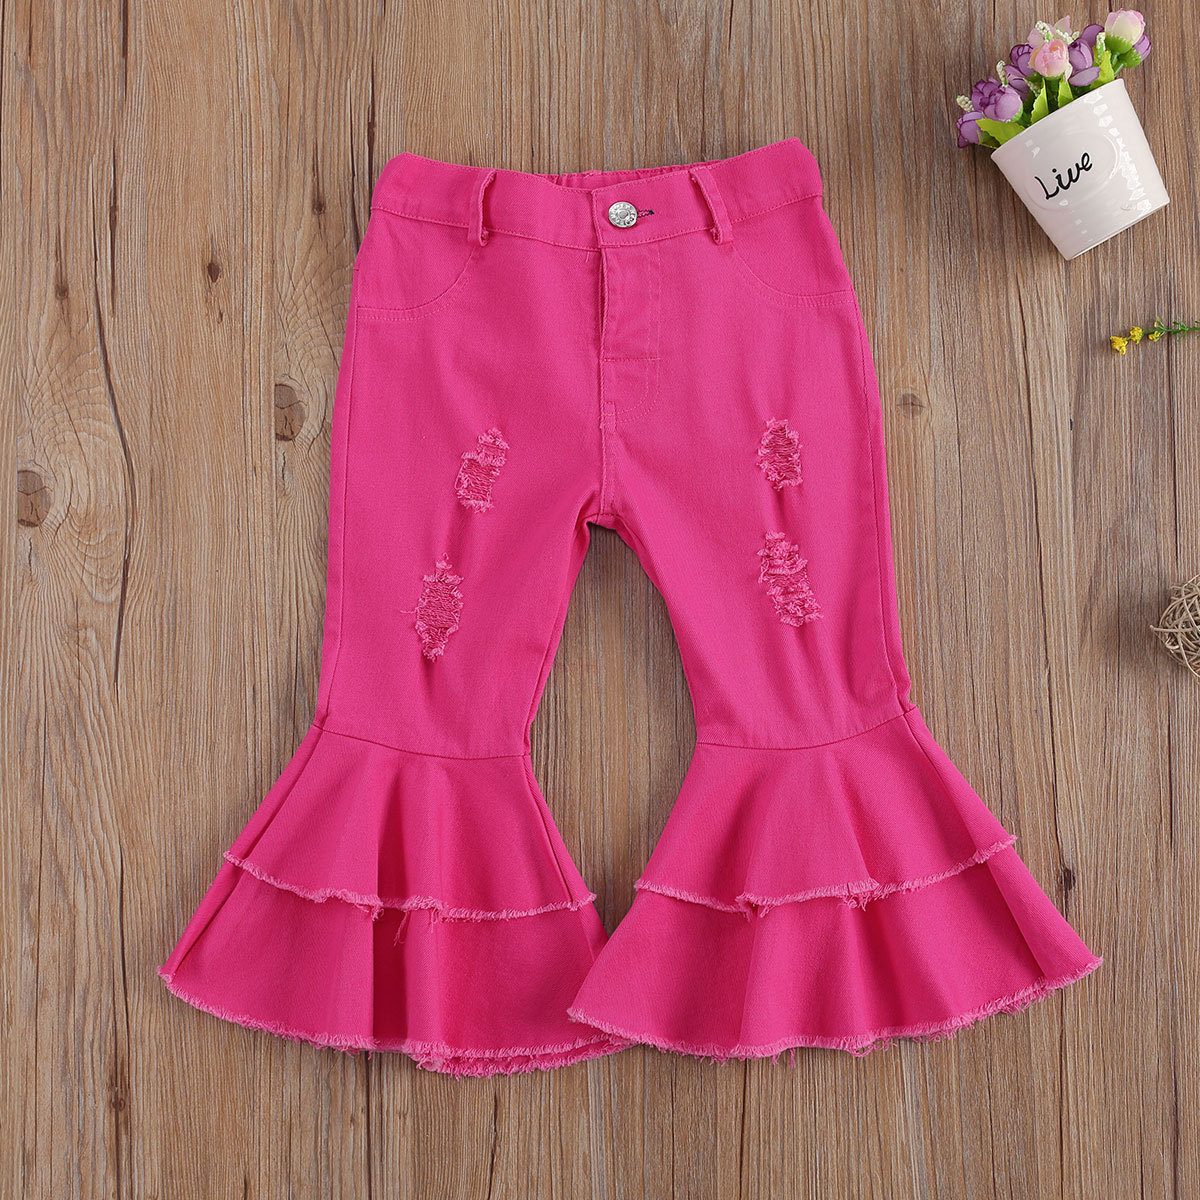 2-6Years Kids Girls Jeans Flare Pants Solid Elastic Waist Button Denim Hole Trousers Pants 5 Colors